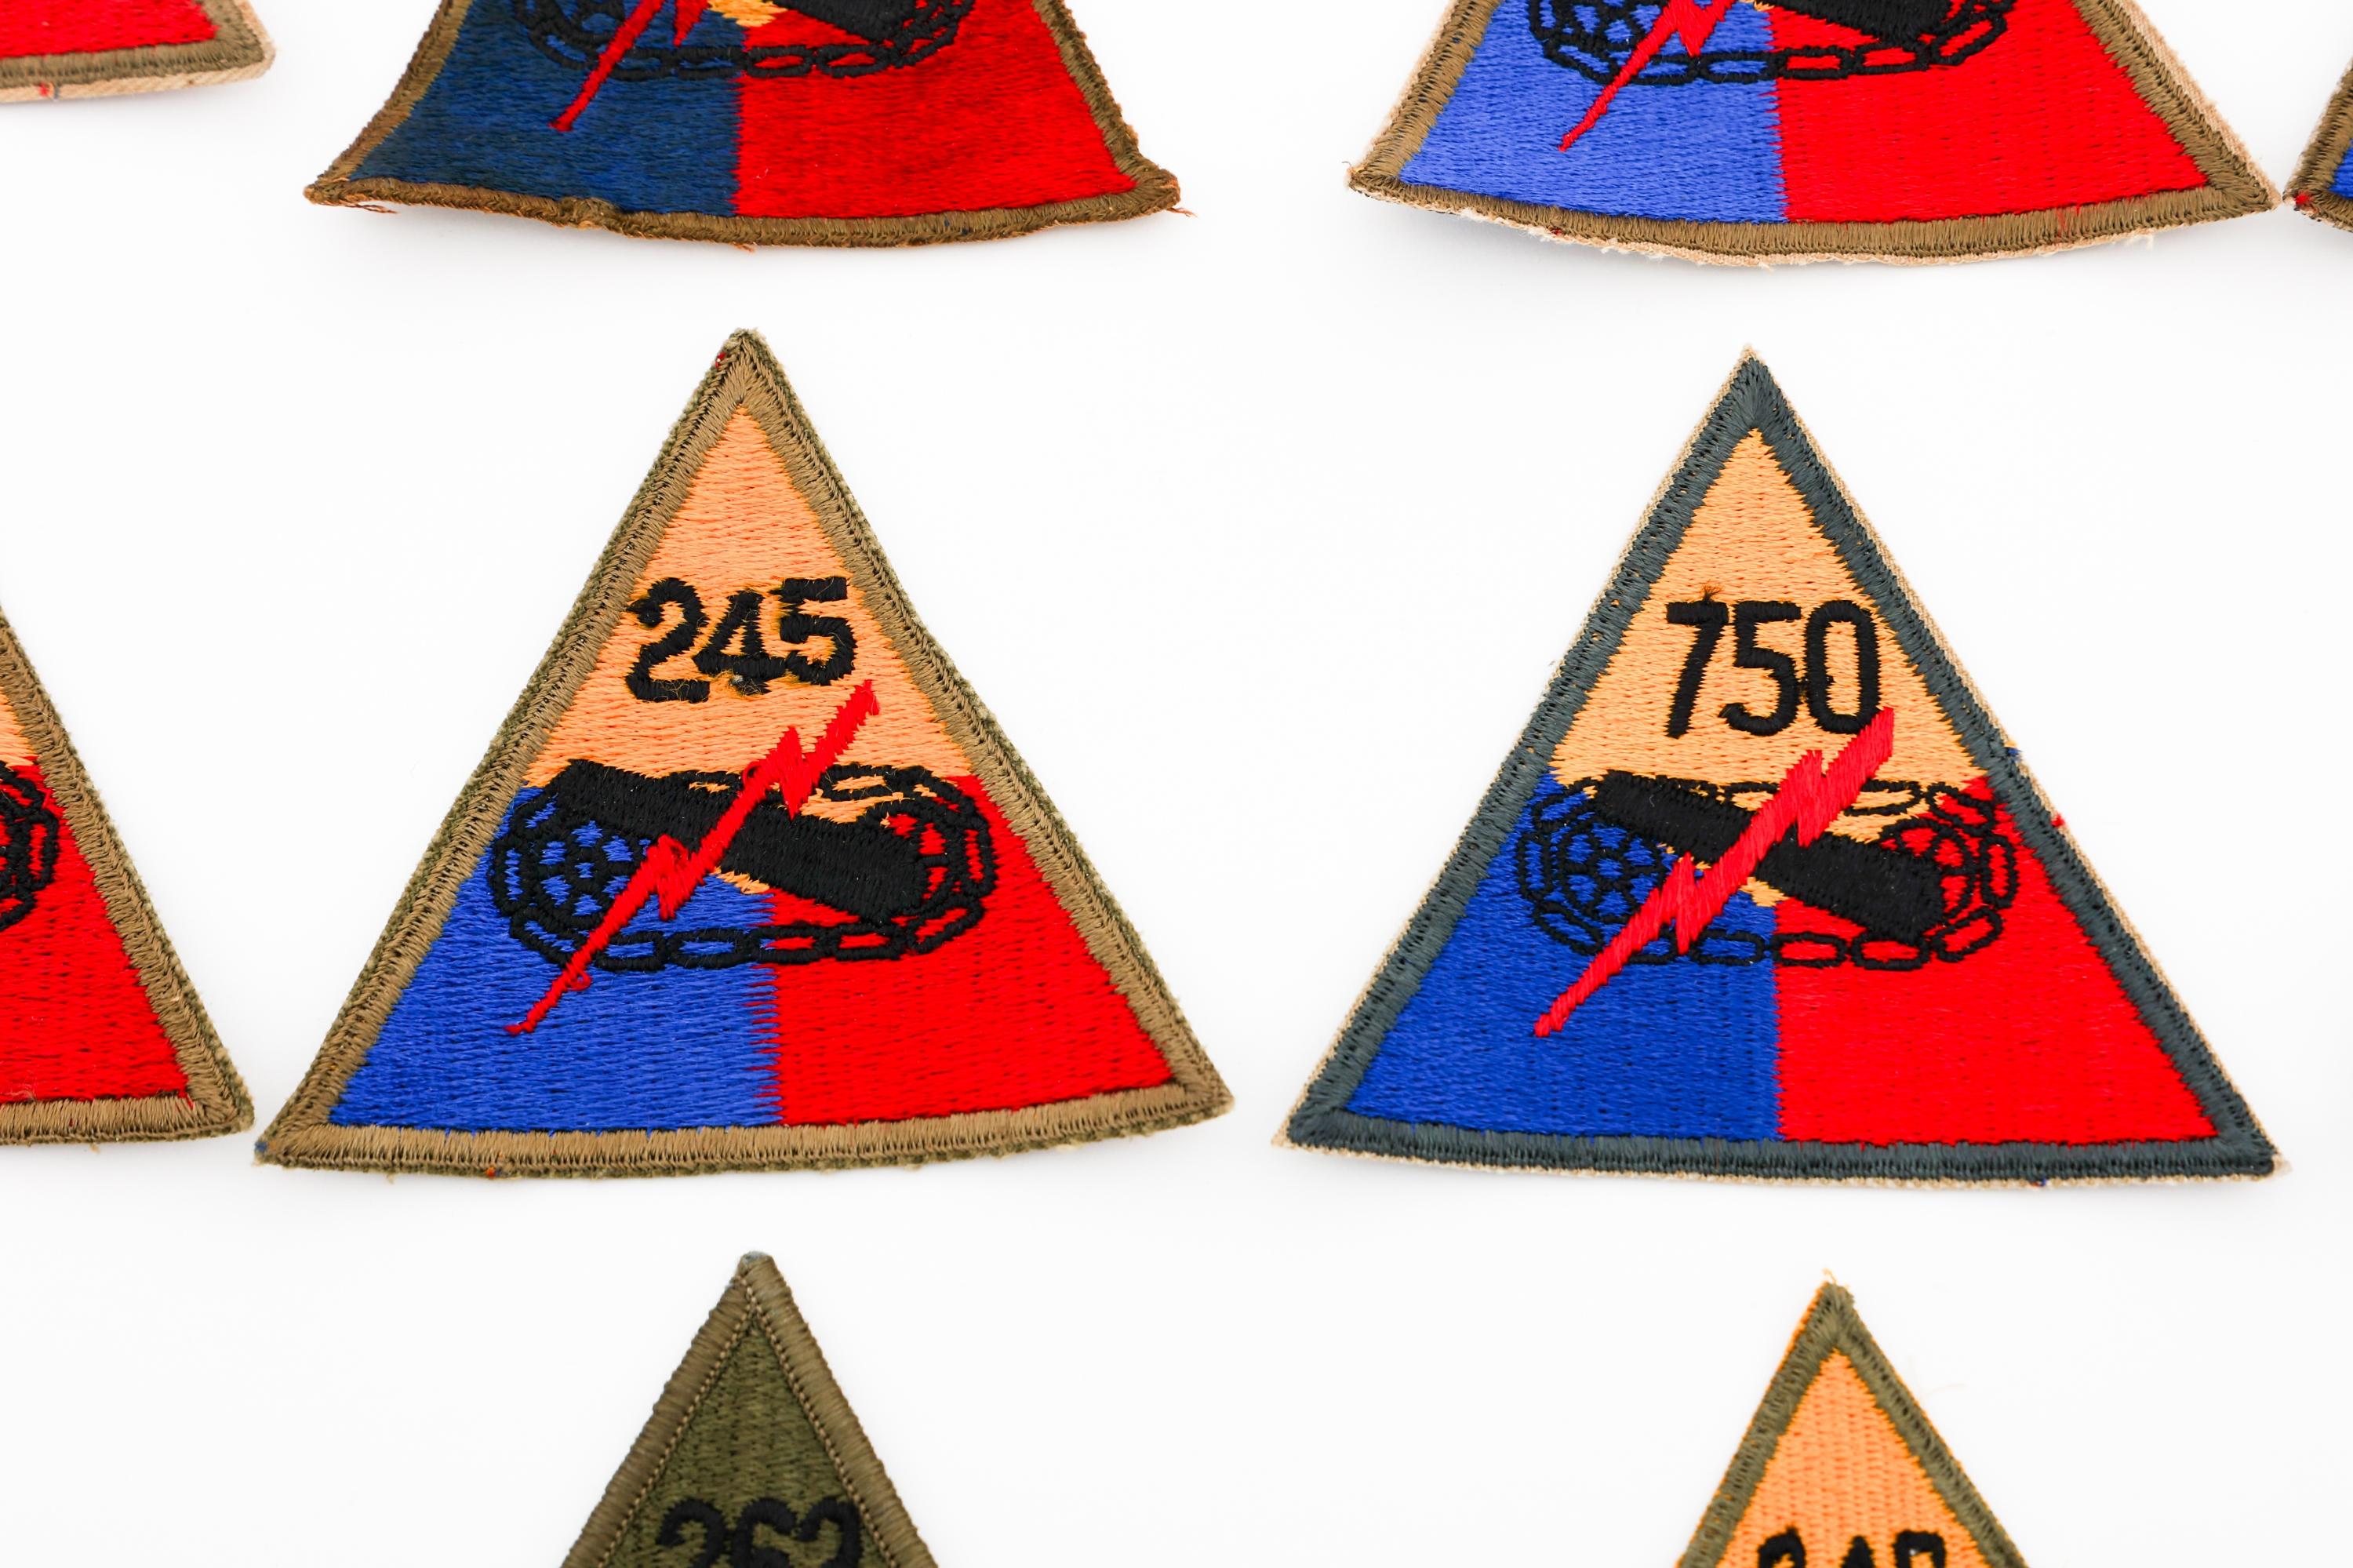 COLD WAR - CURRENT US ARMY TANK BATALLION PATCHES